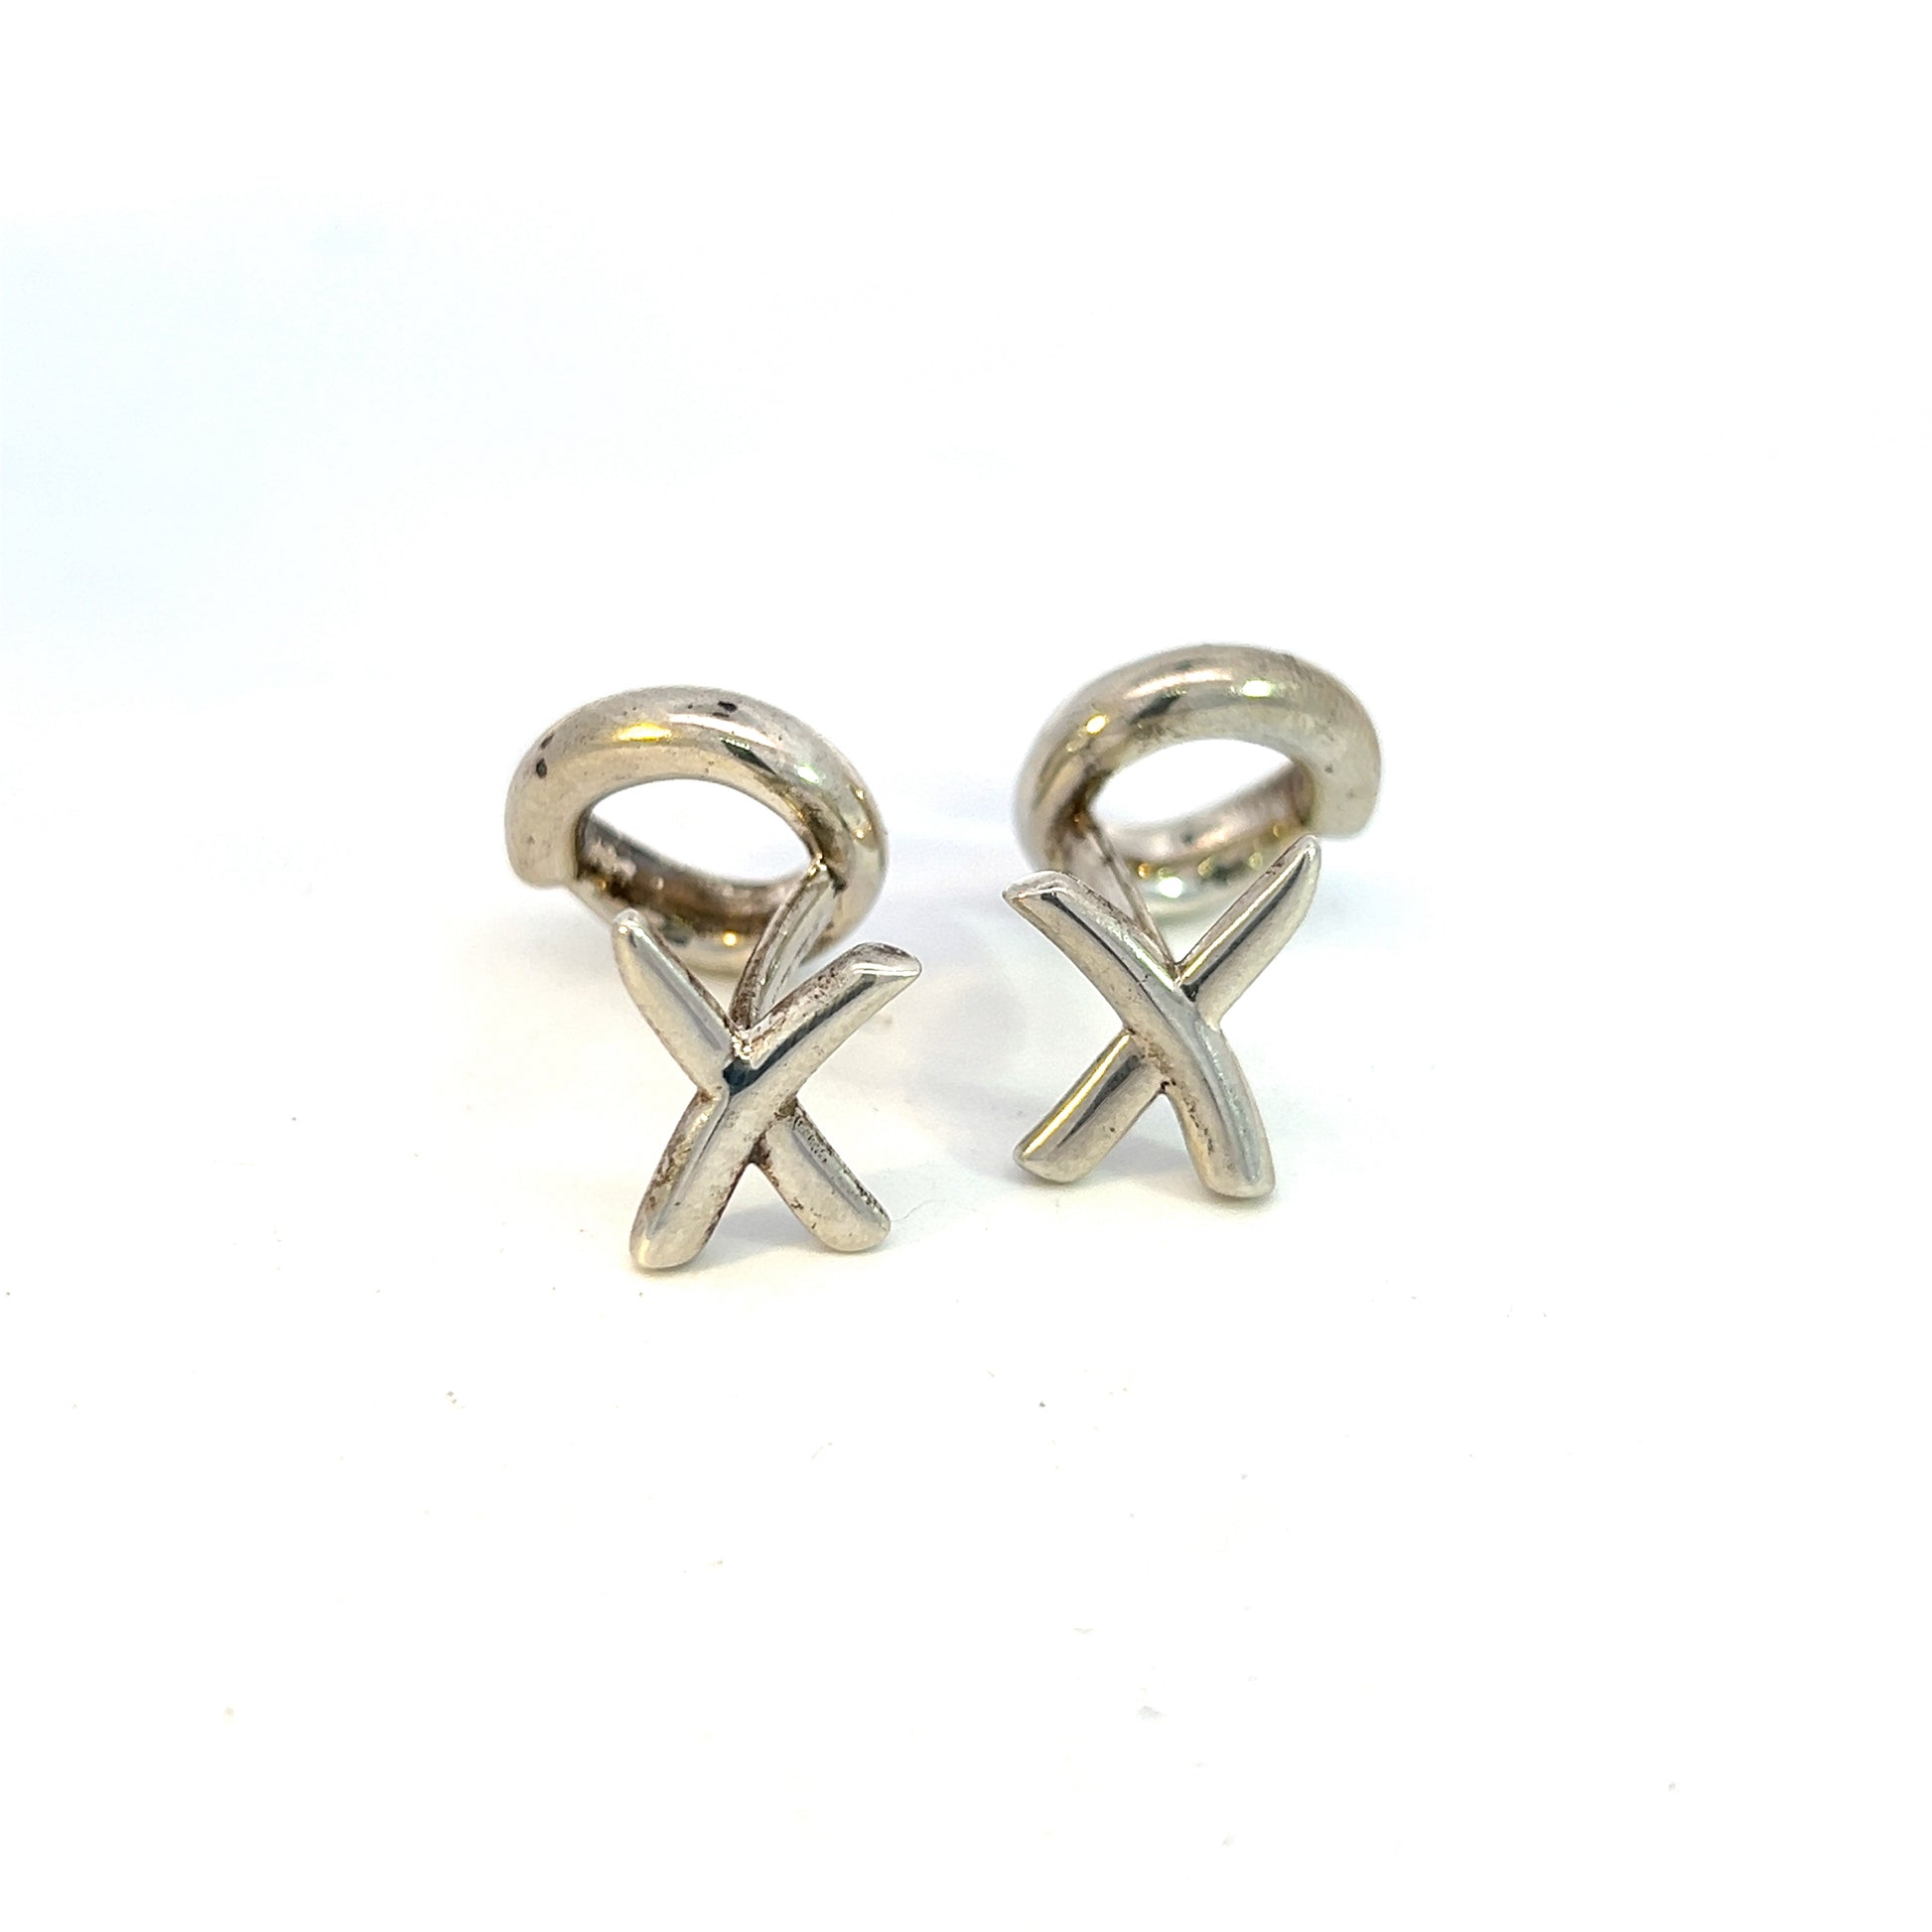 Tiffany & Co Estate Cufflinks Sterling Silver By Paloma Picasso TIF571 - Certified Fine Jewelry